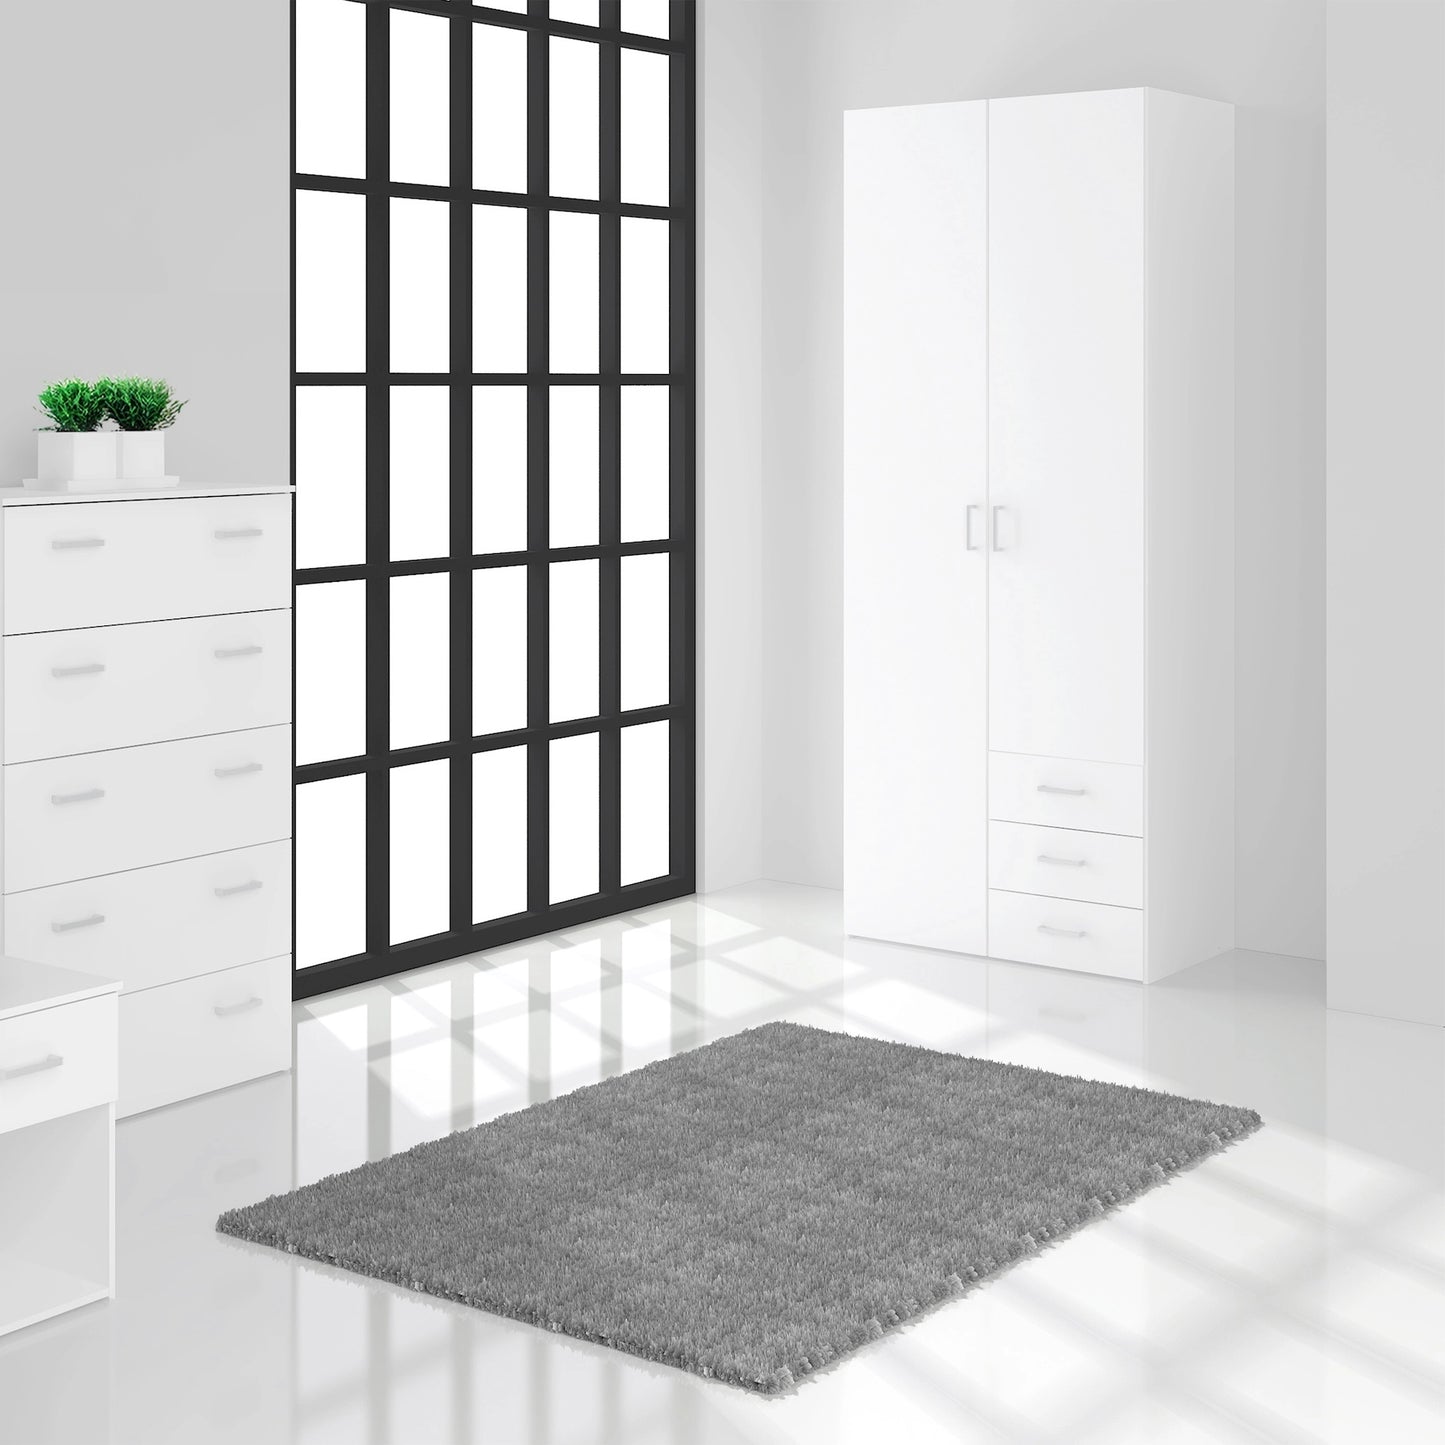 Furniture To Go Space Wardrobe - 2 Doors 3 Drawers in White 2000